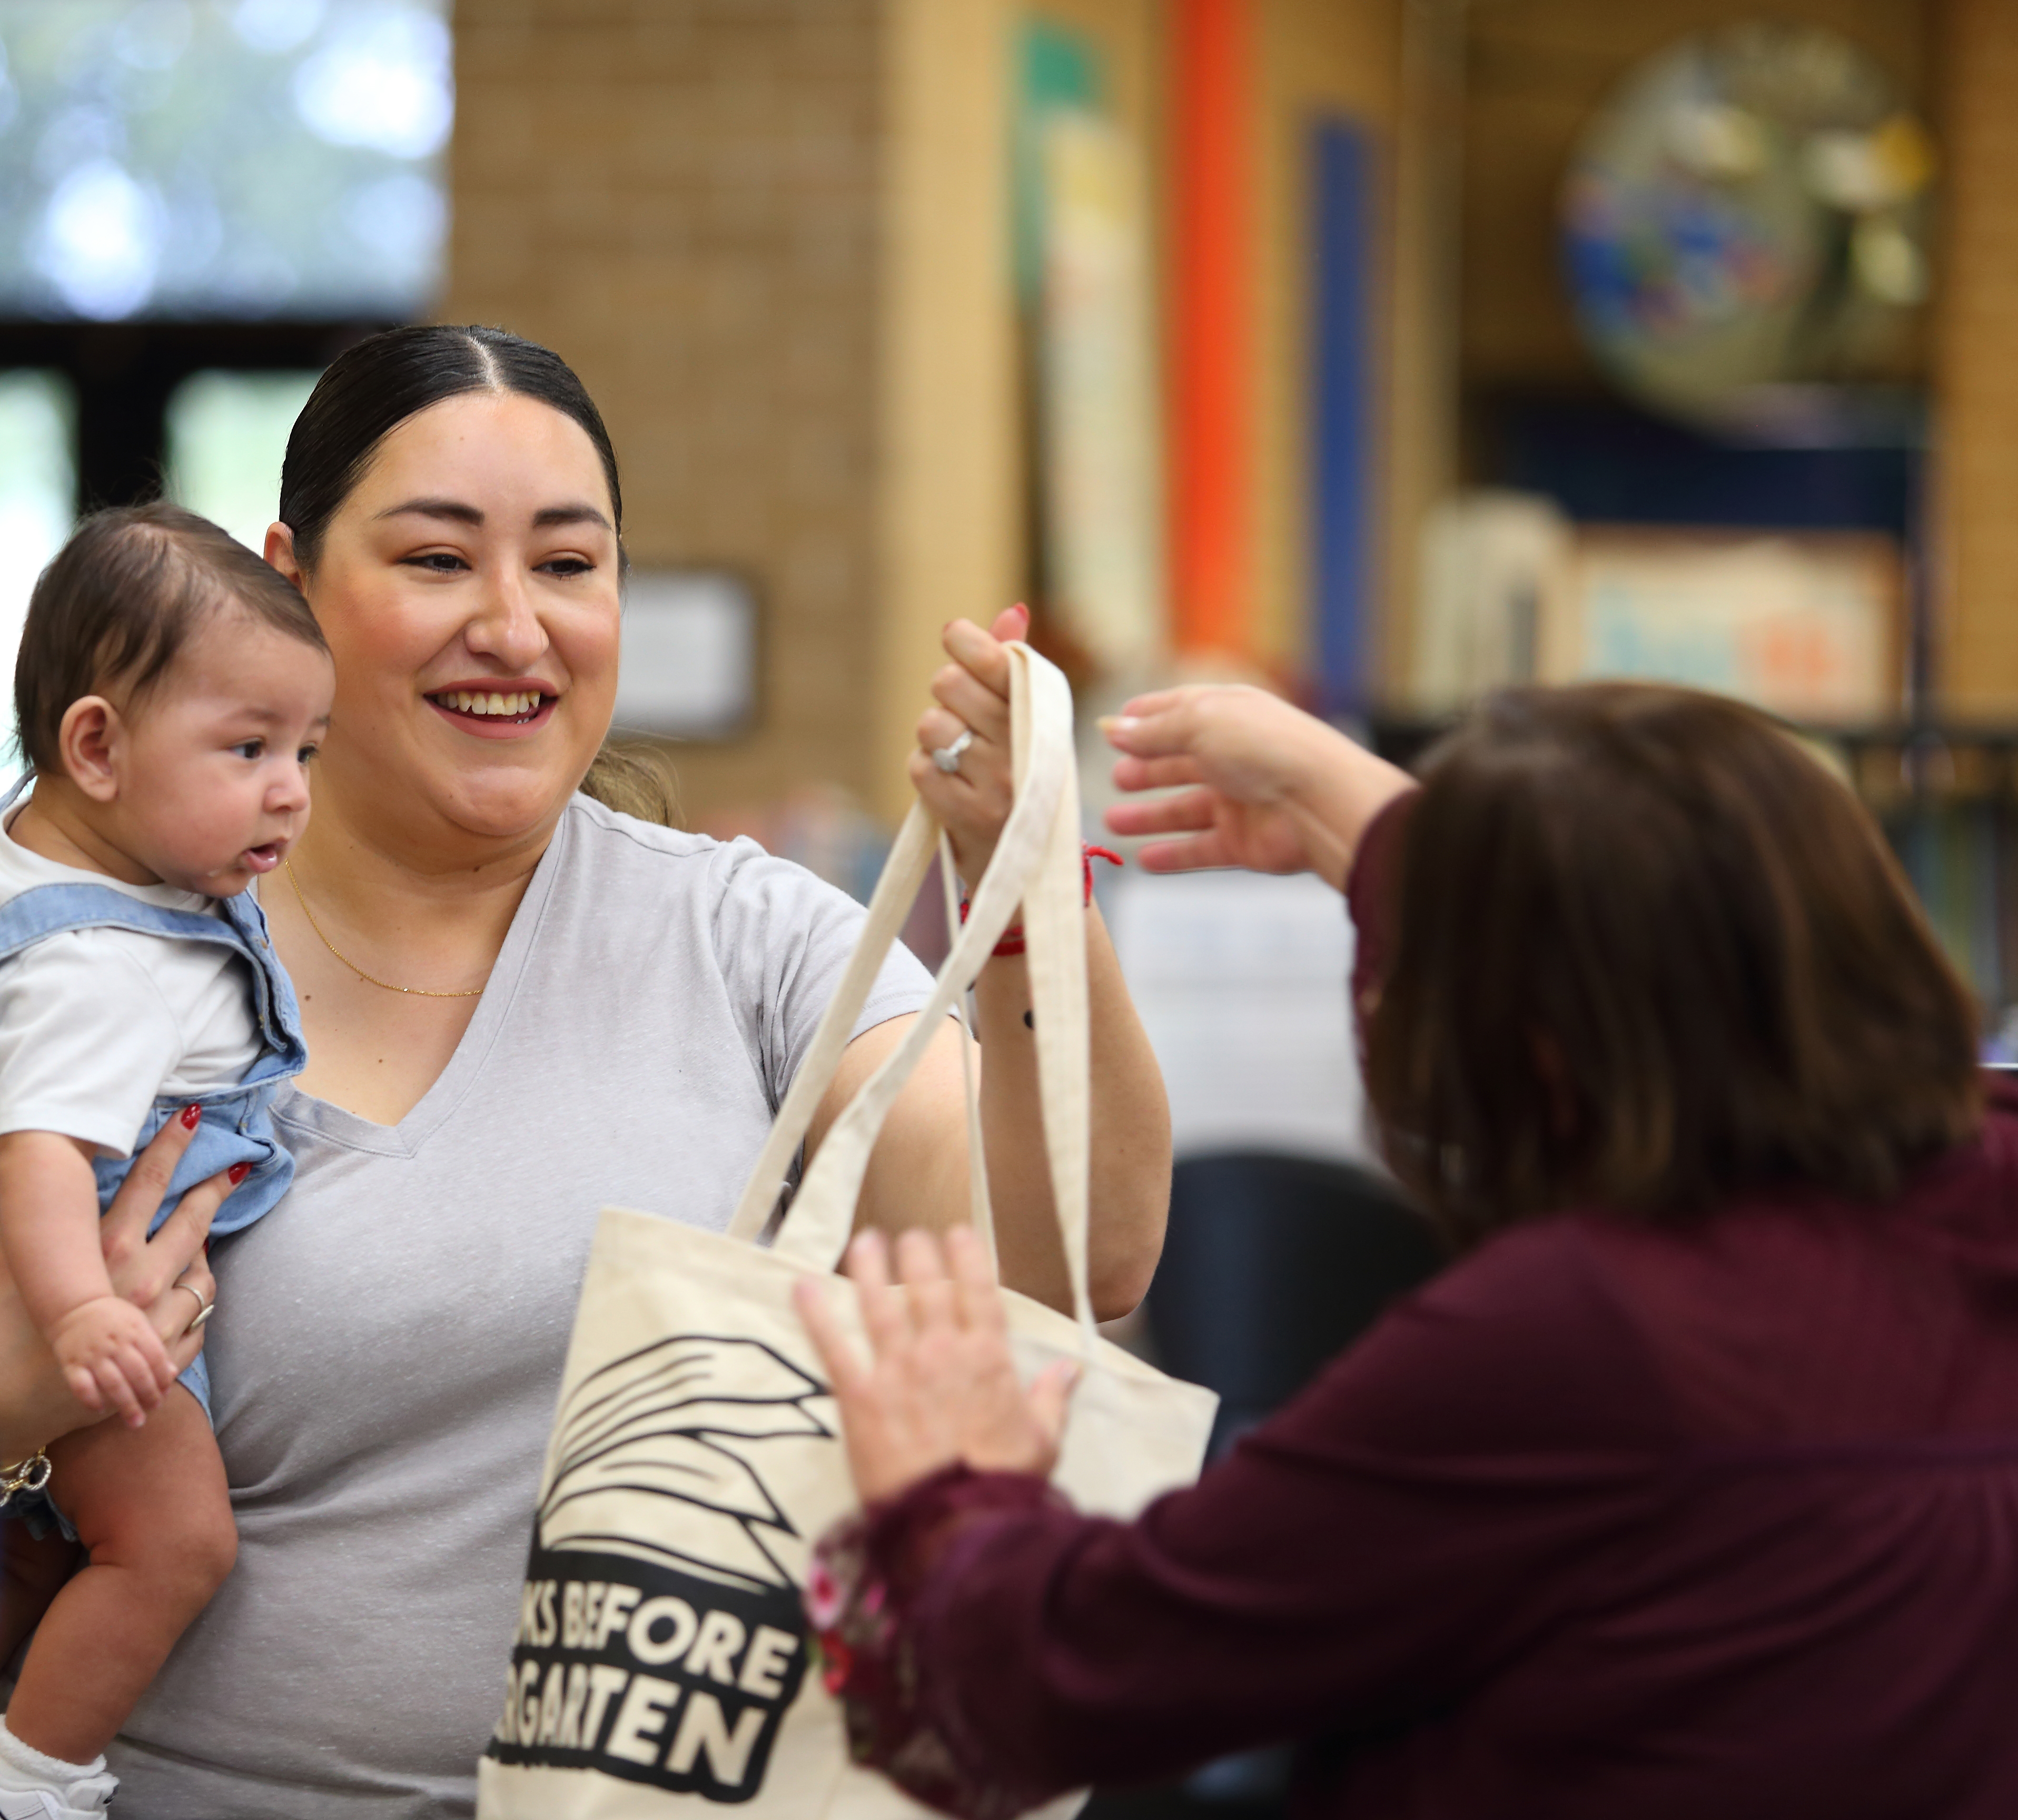 mom and baby receive free tote bag